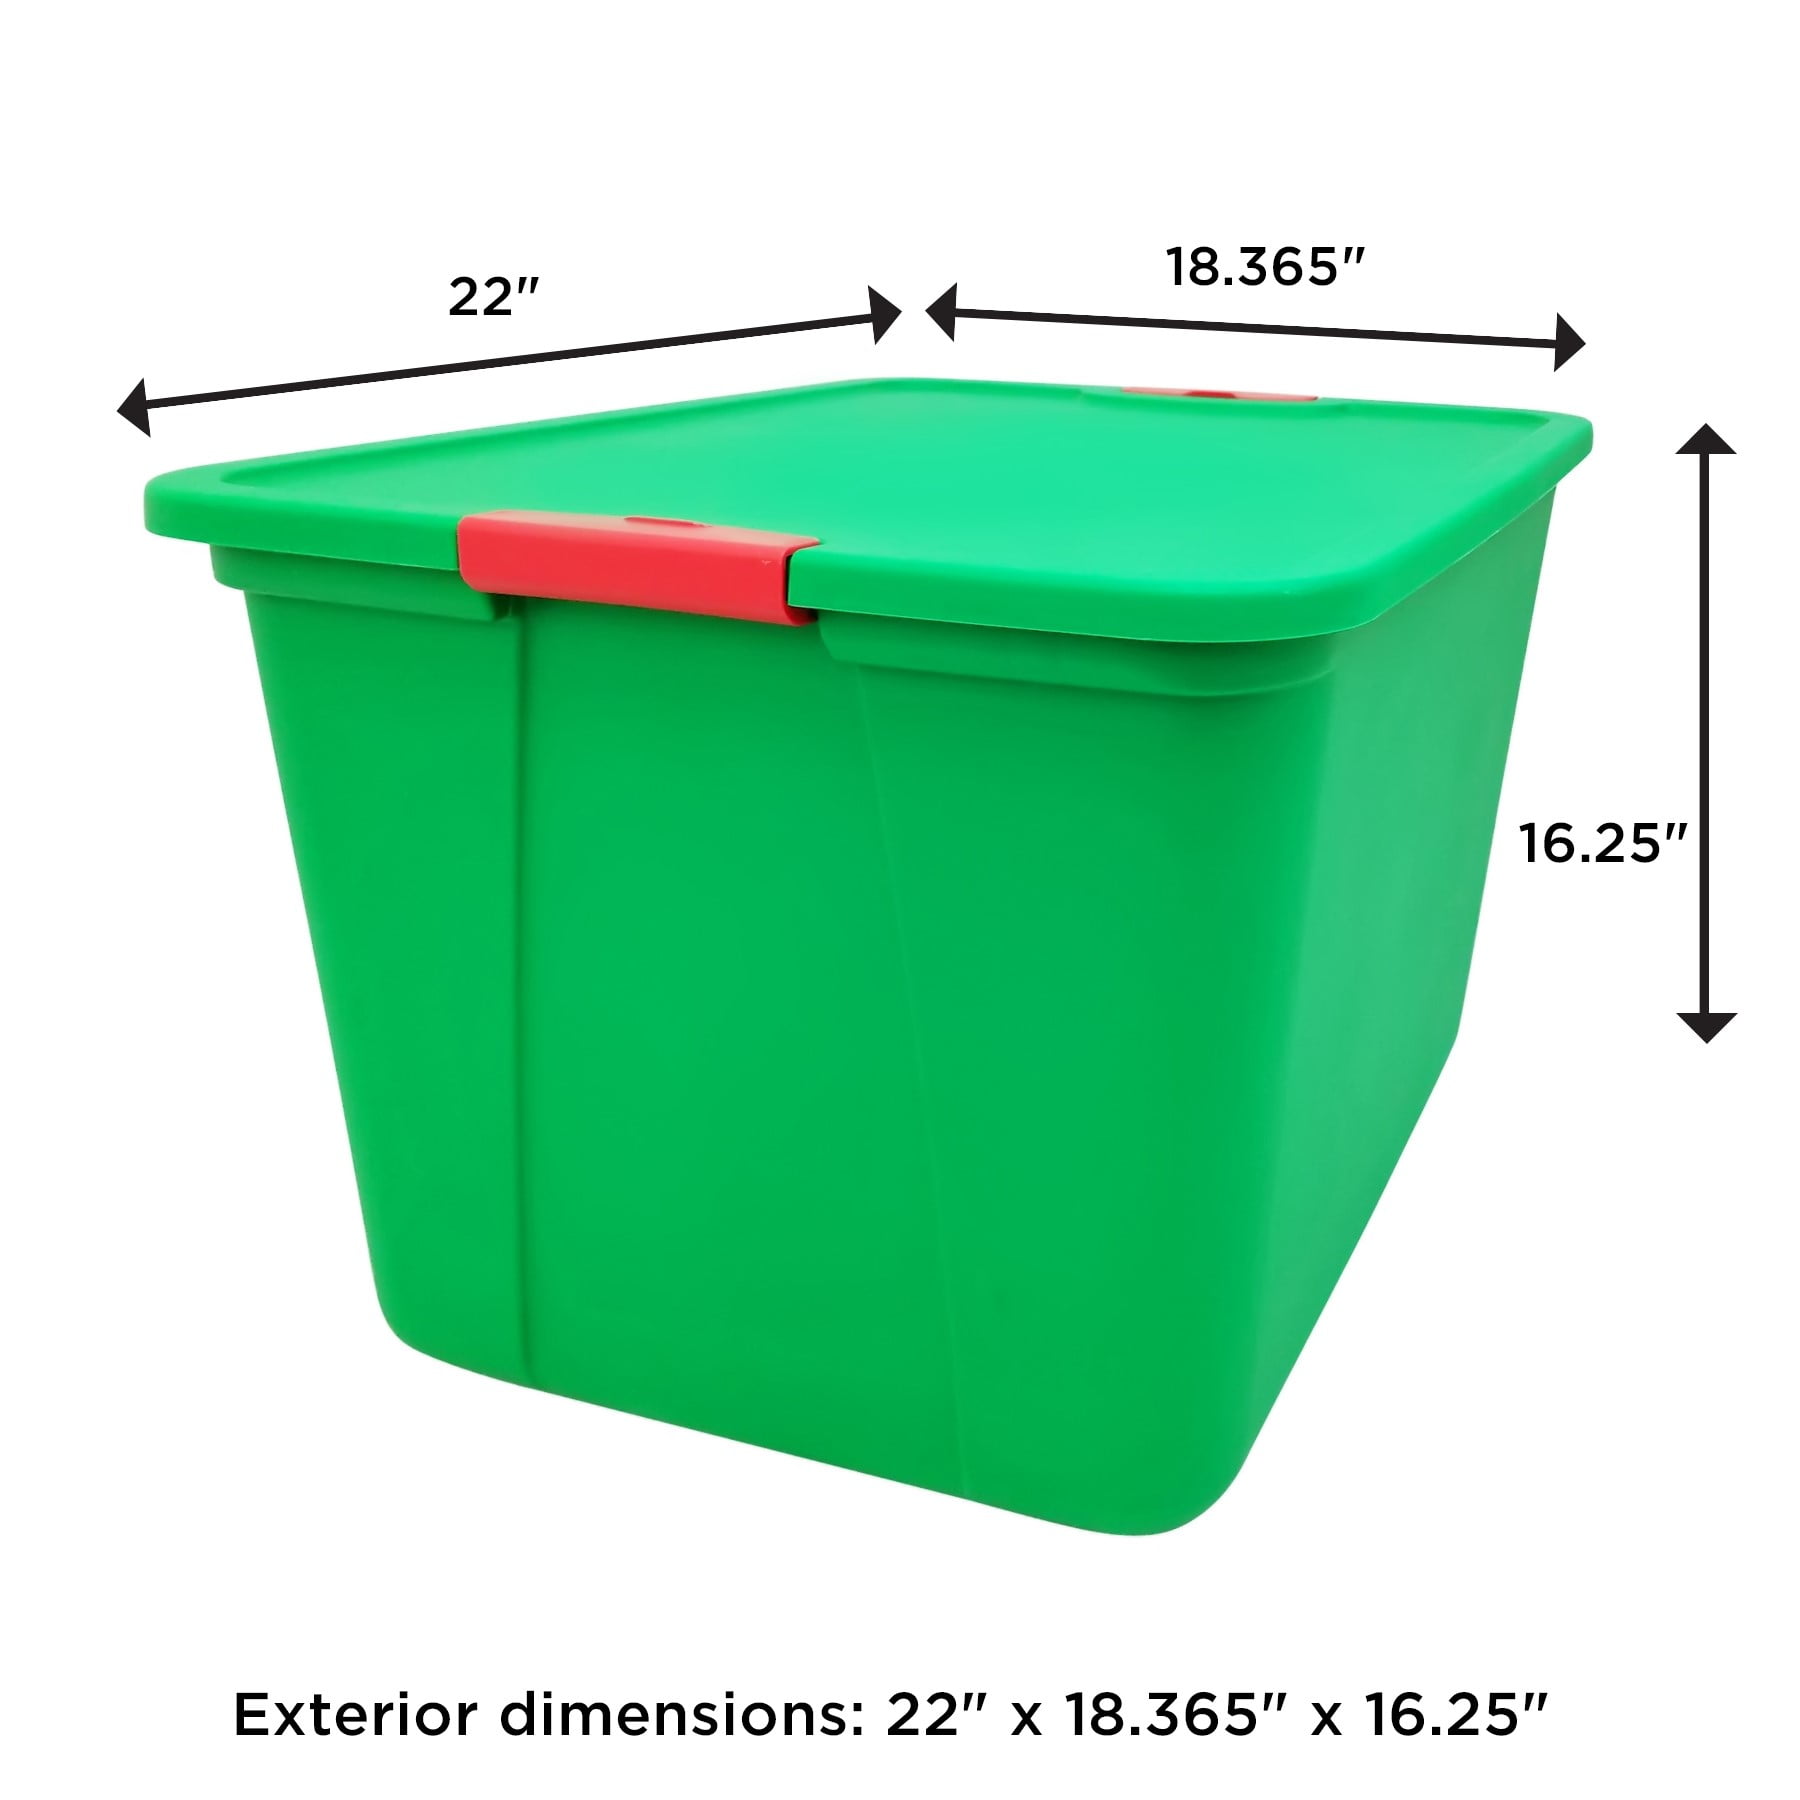 Mainstays 20 Gallon Red Storage Container, Green Latches, Set of 8 